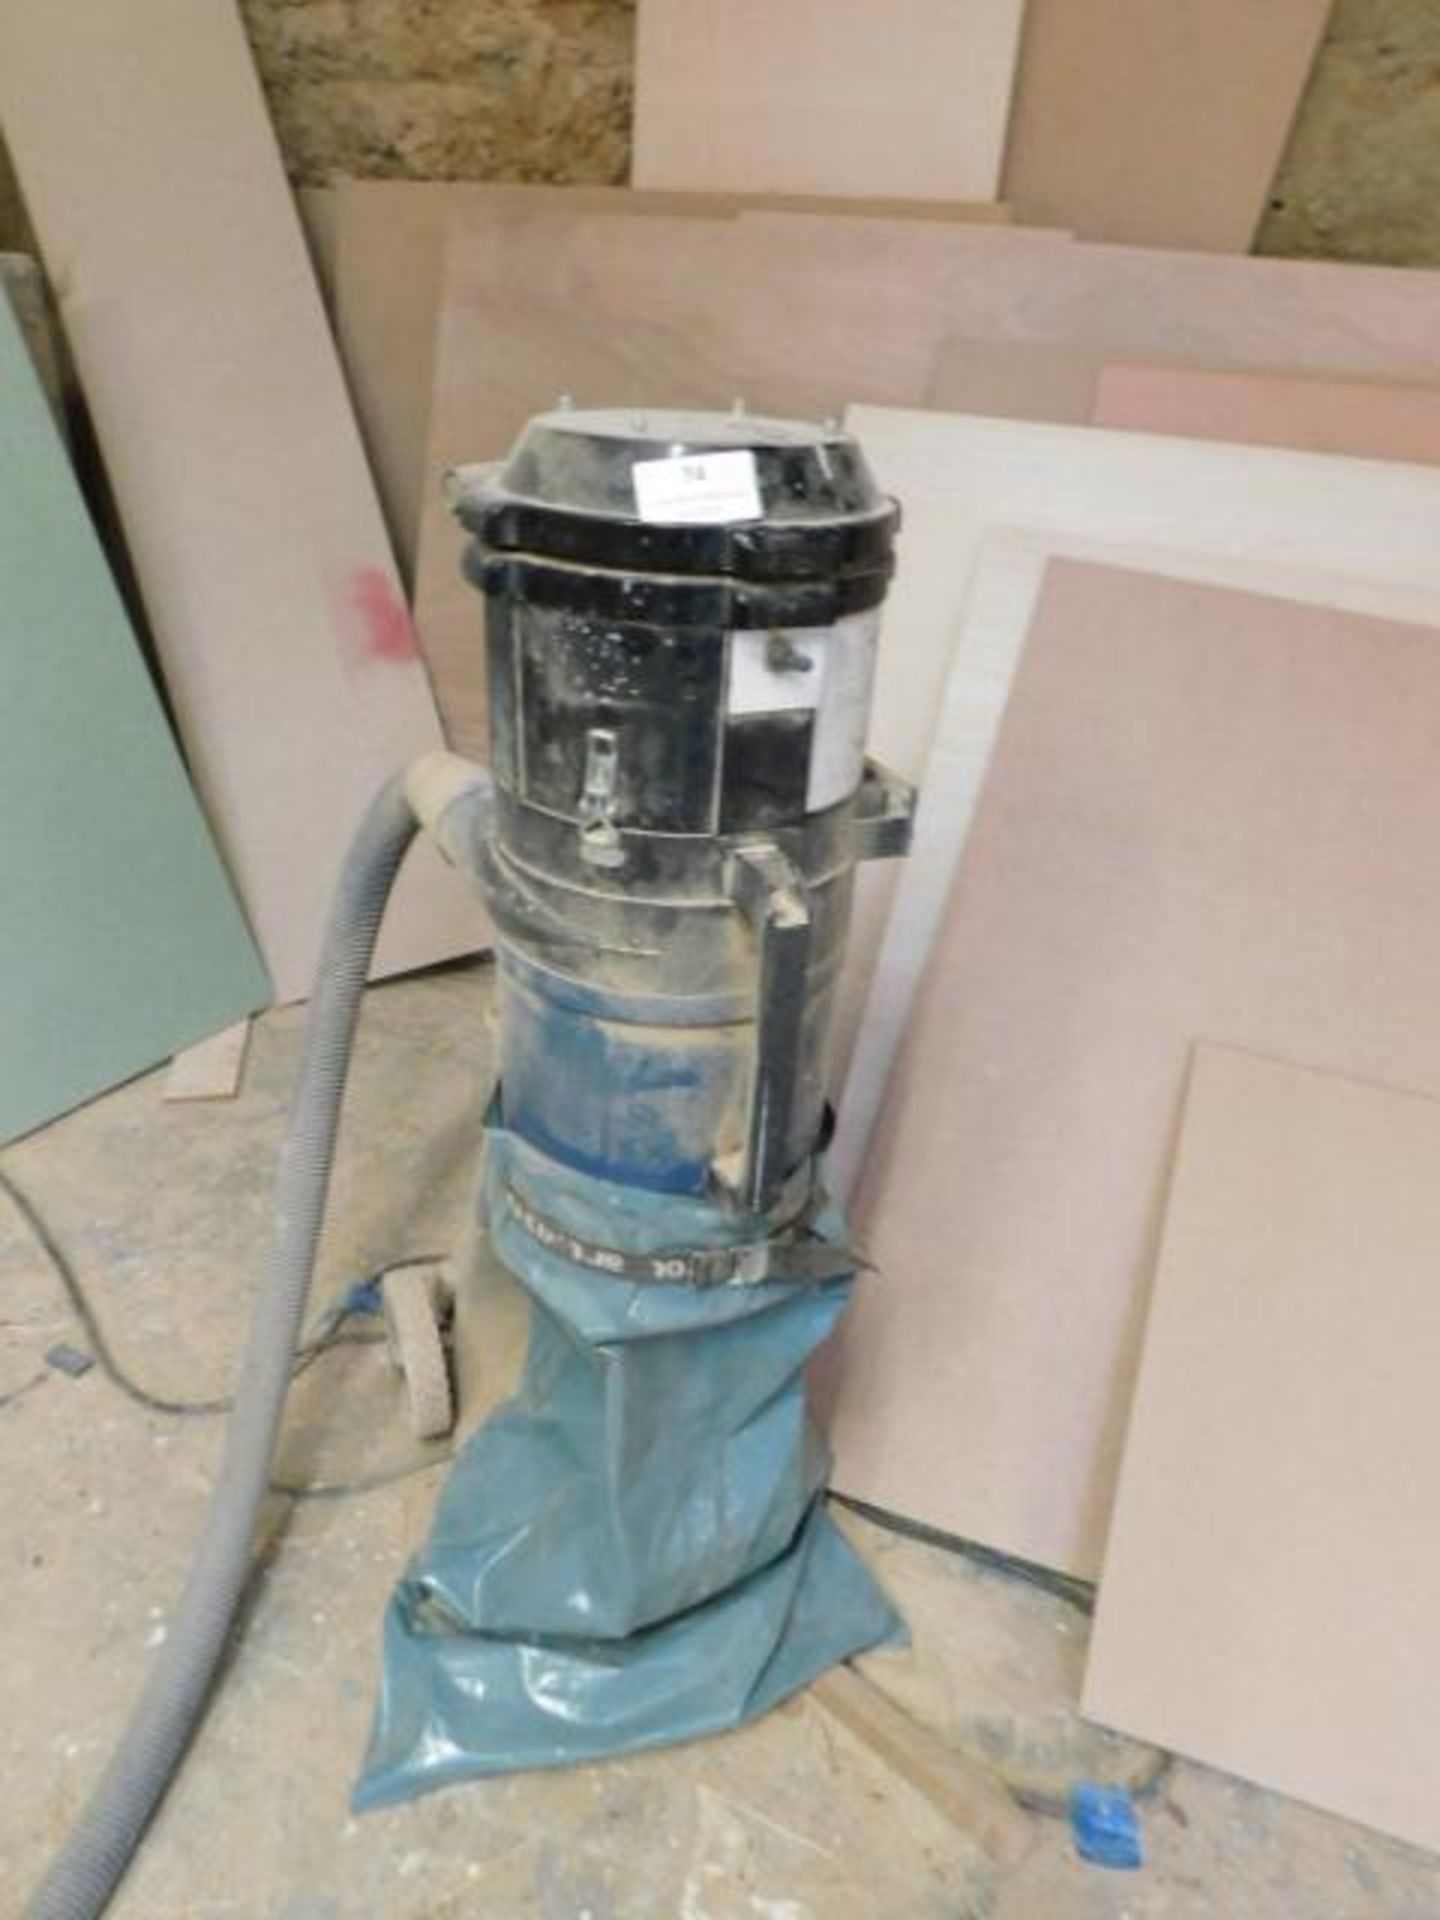 *Dust Central Dc2700c Dust Extractor